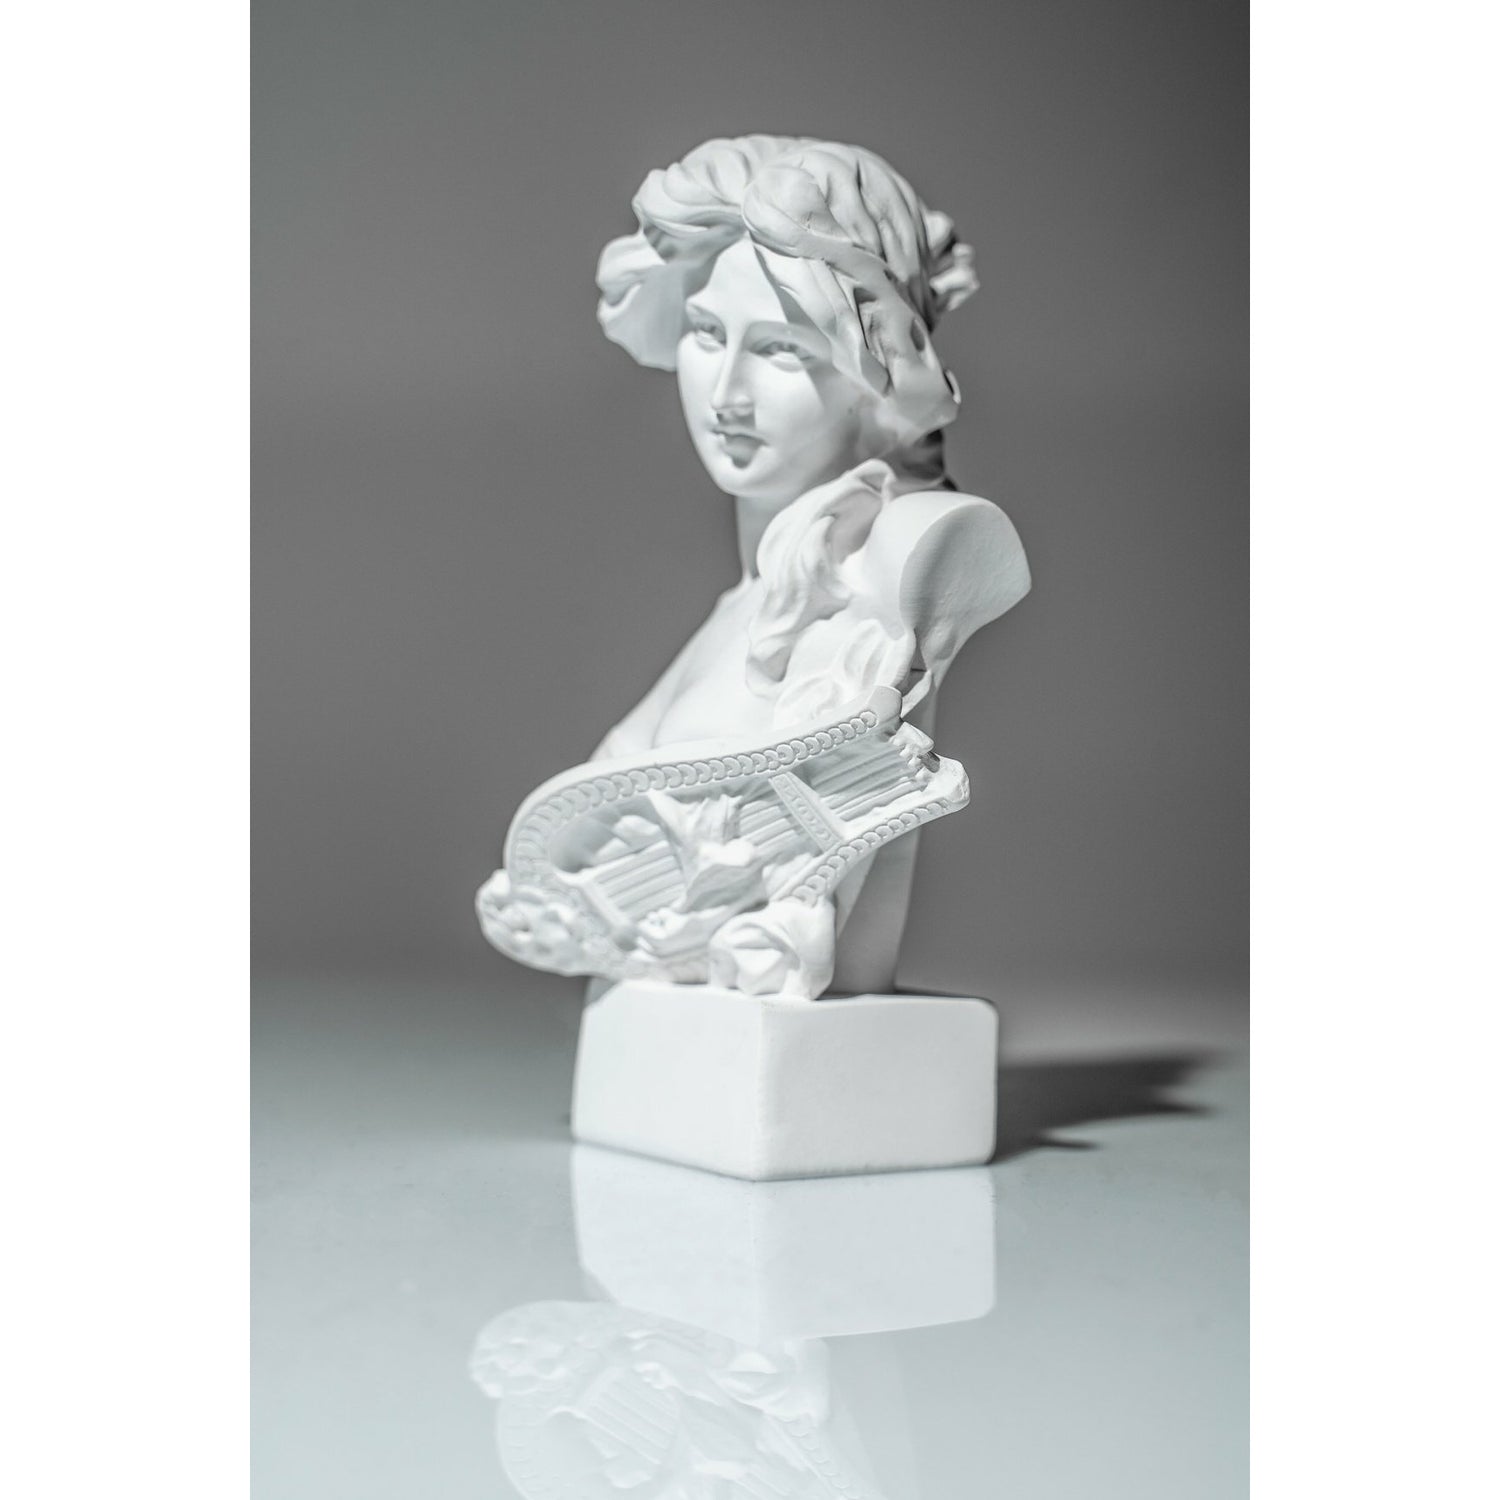 Lady With Harp Sculpture - Our Lady With Harp Sculpture is a timeless piece that’s an icon of Roman mythology.